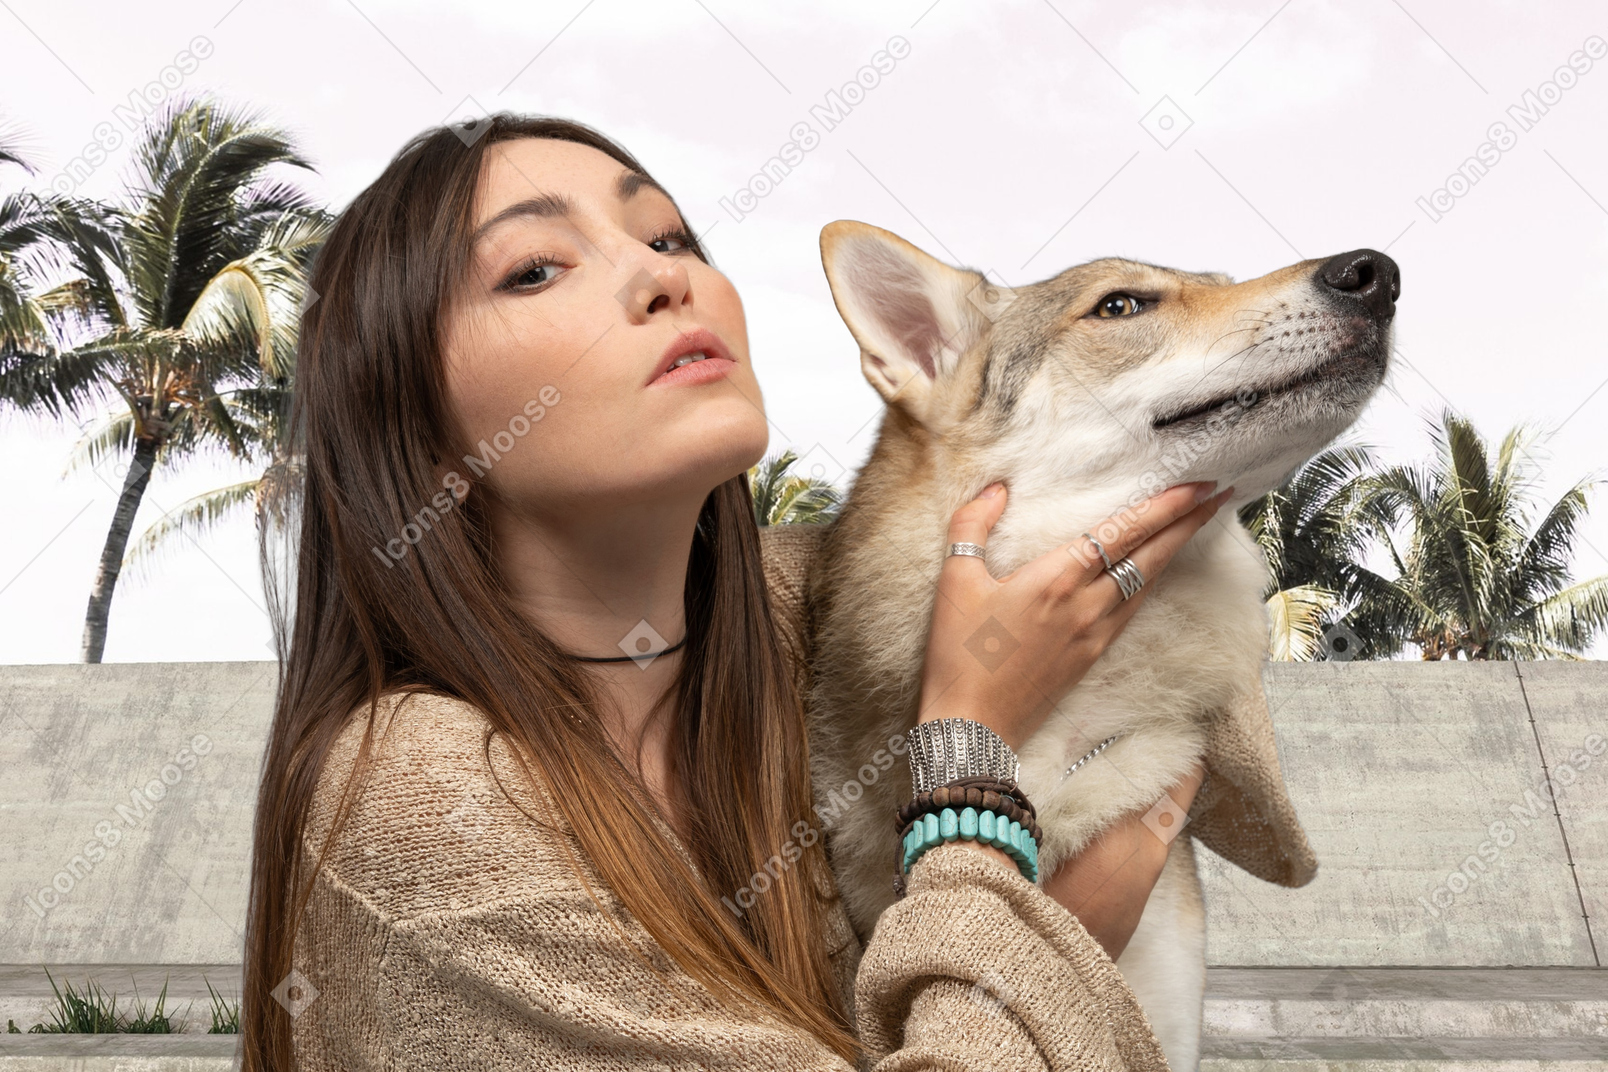 Woman posing with her dog